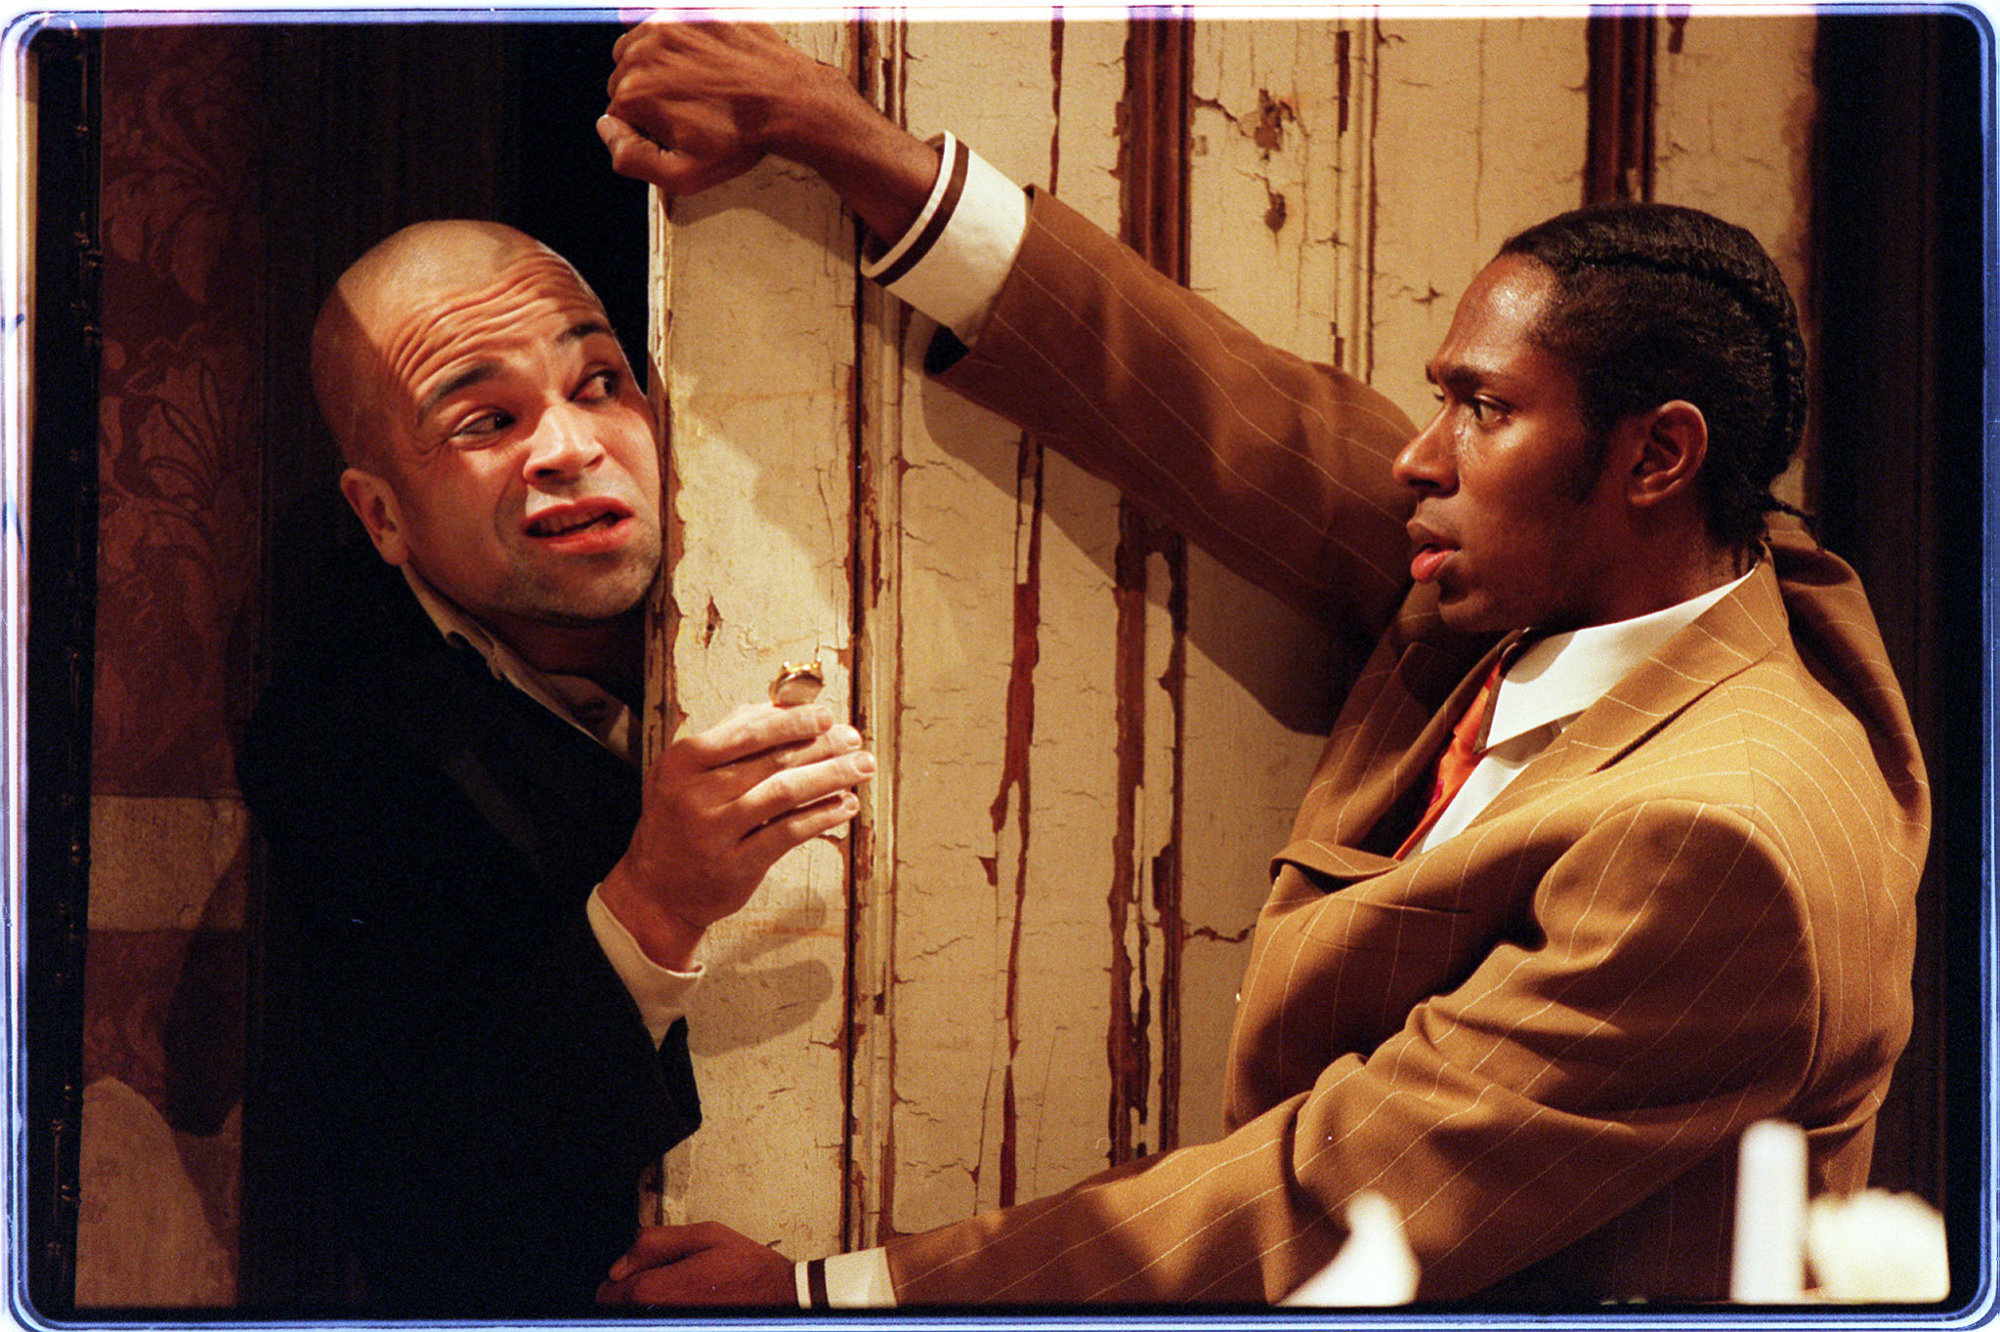 Wright and Yasiin Bey (formerly known as rapper Mos Def) in the 2002 Broadway production of Suzan-Lori Park's play 